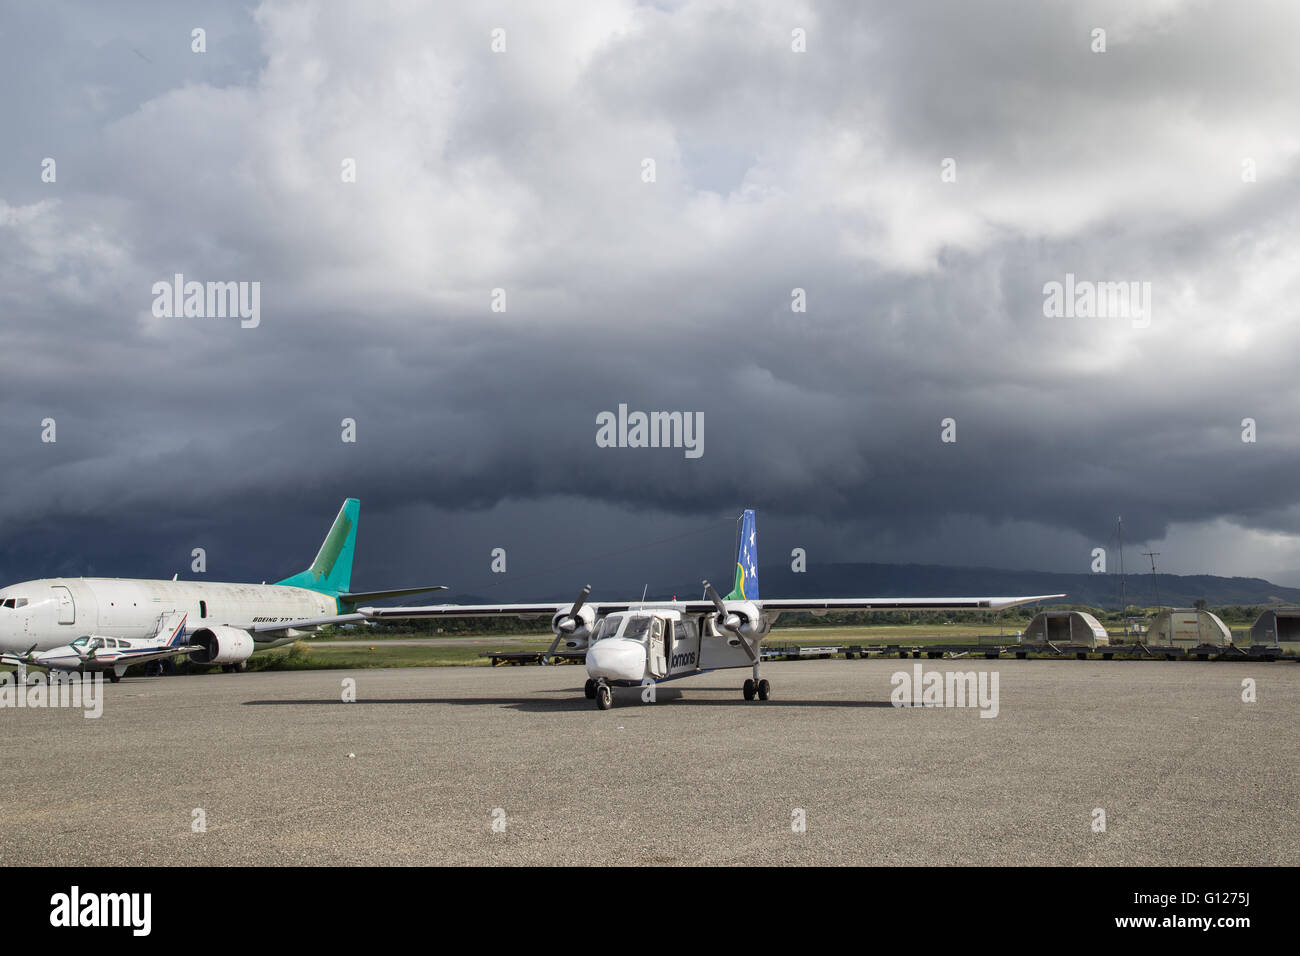 Honiara, Solomon Islands - May 27, 2015: Small propeller plane parked at the airport Stock Photo